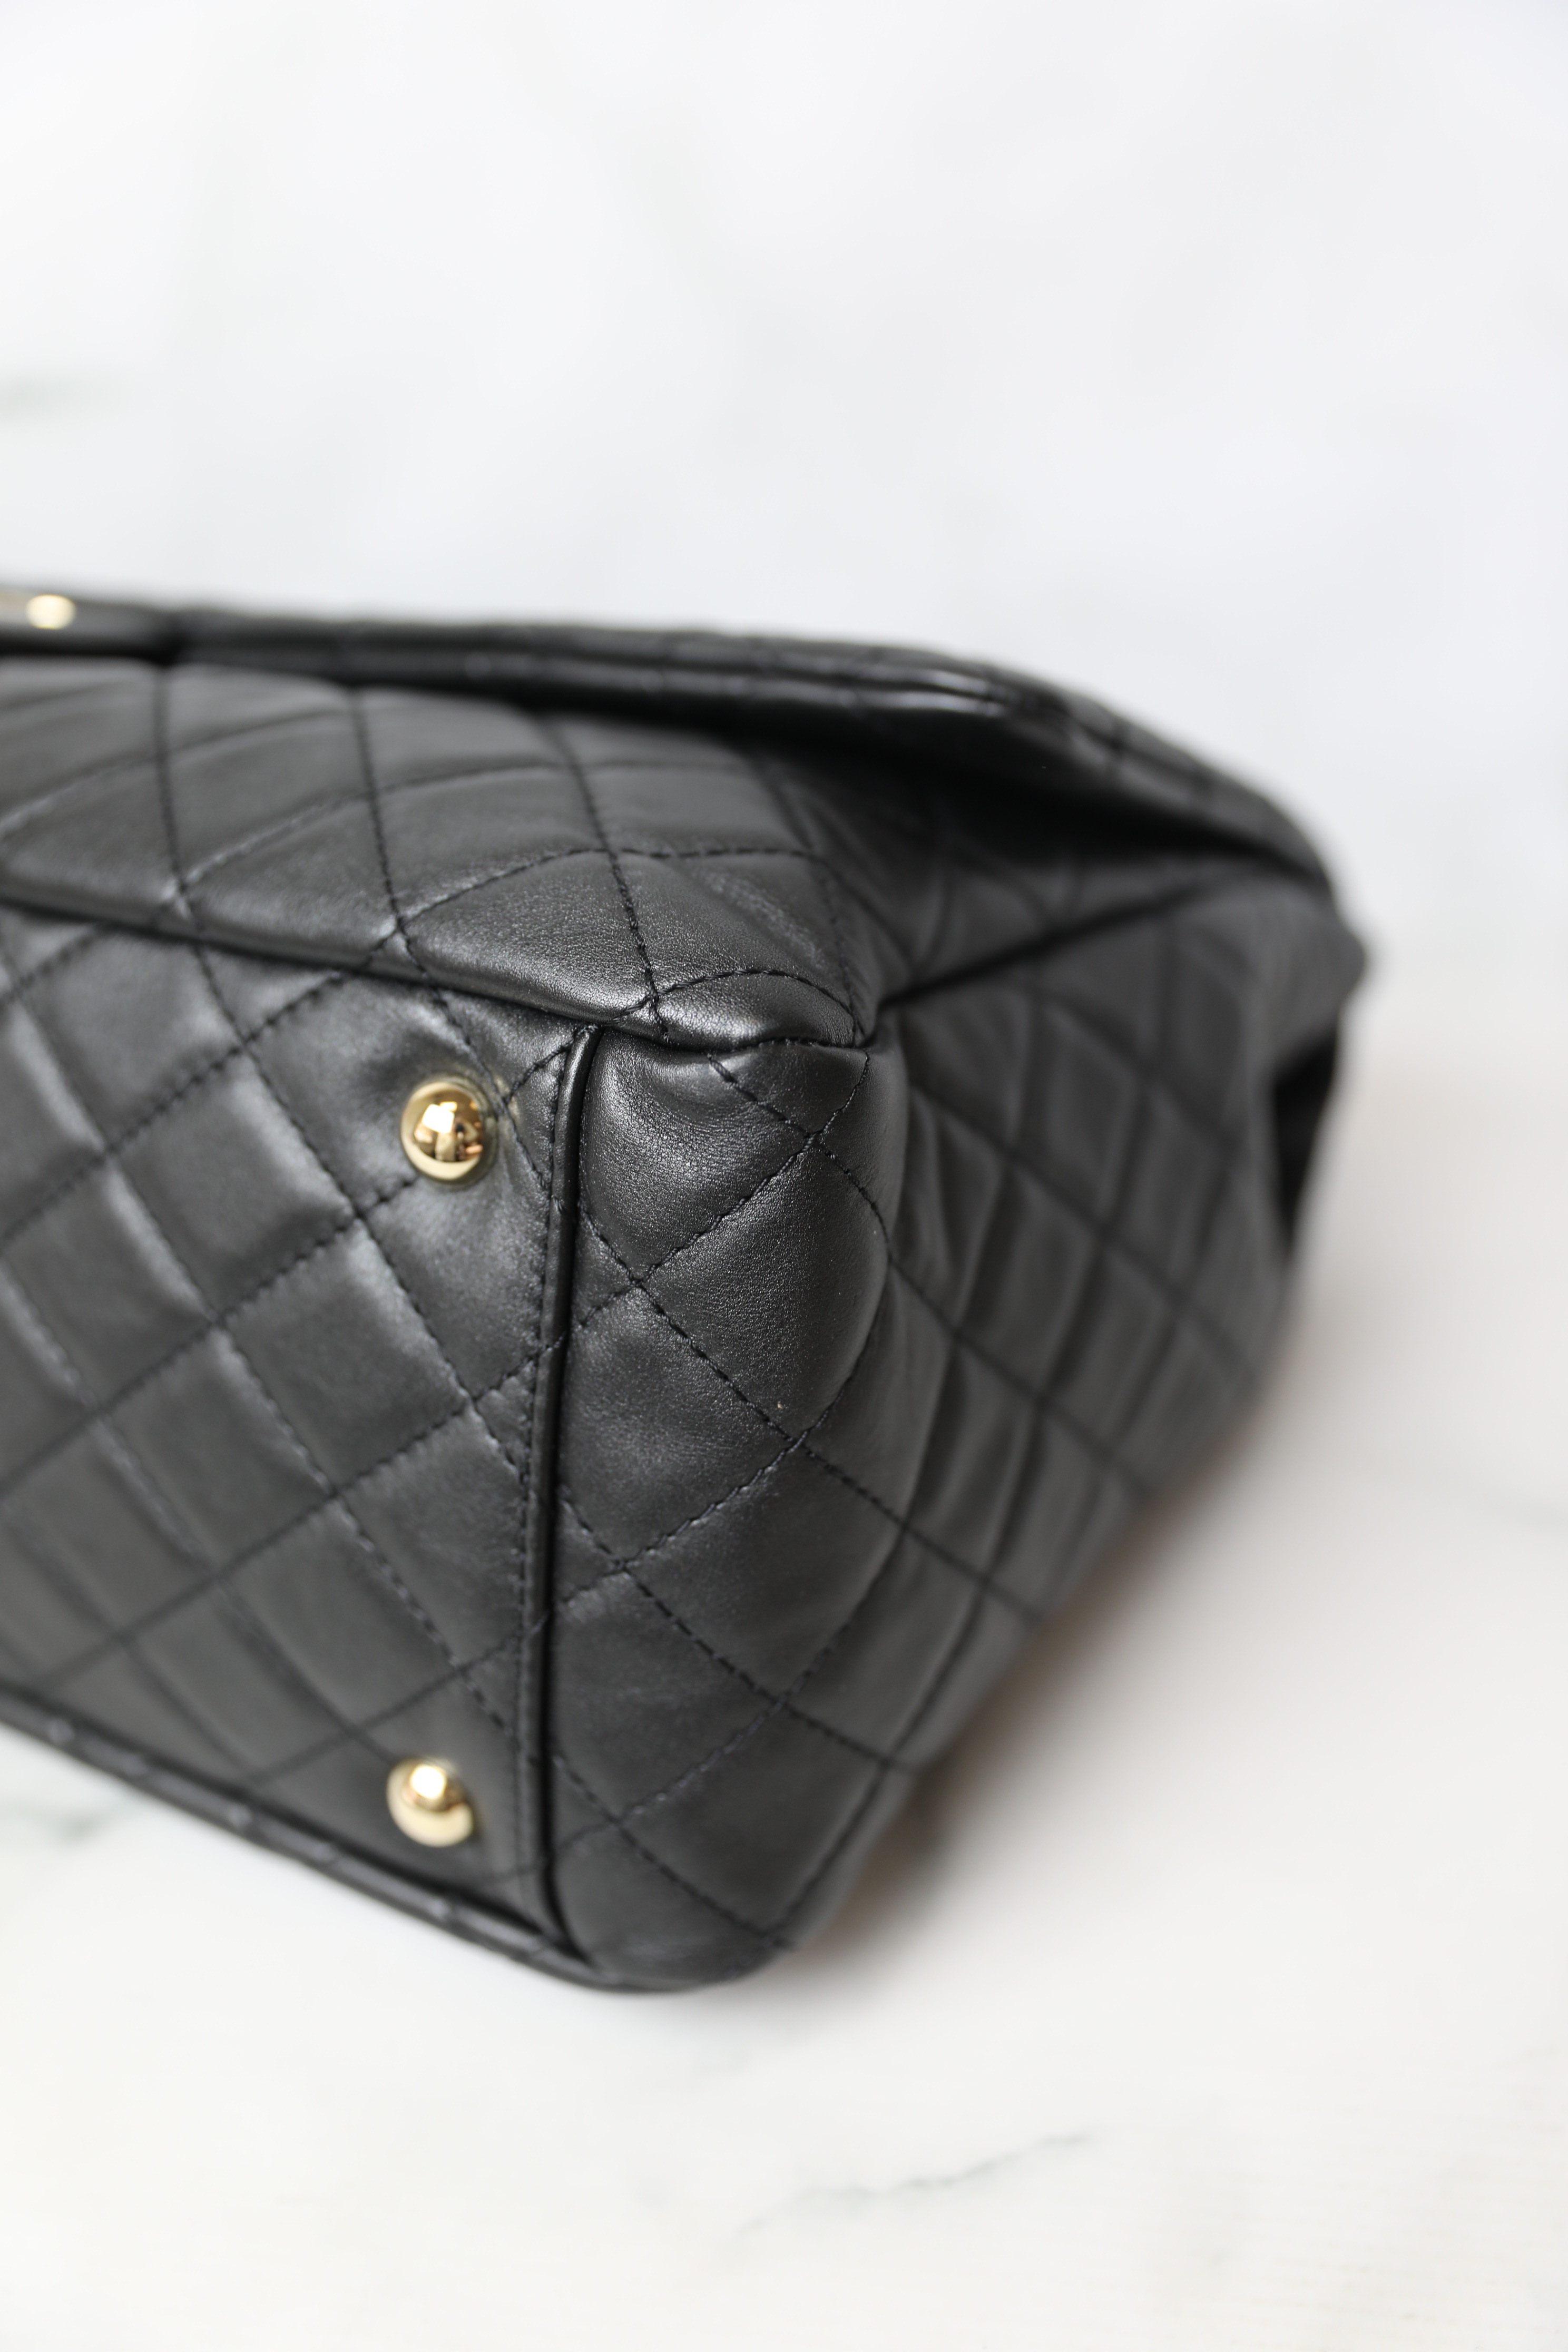 Chanel XXL Airline Flap, Charcoal Iridescent Calfskin with Gold